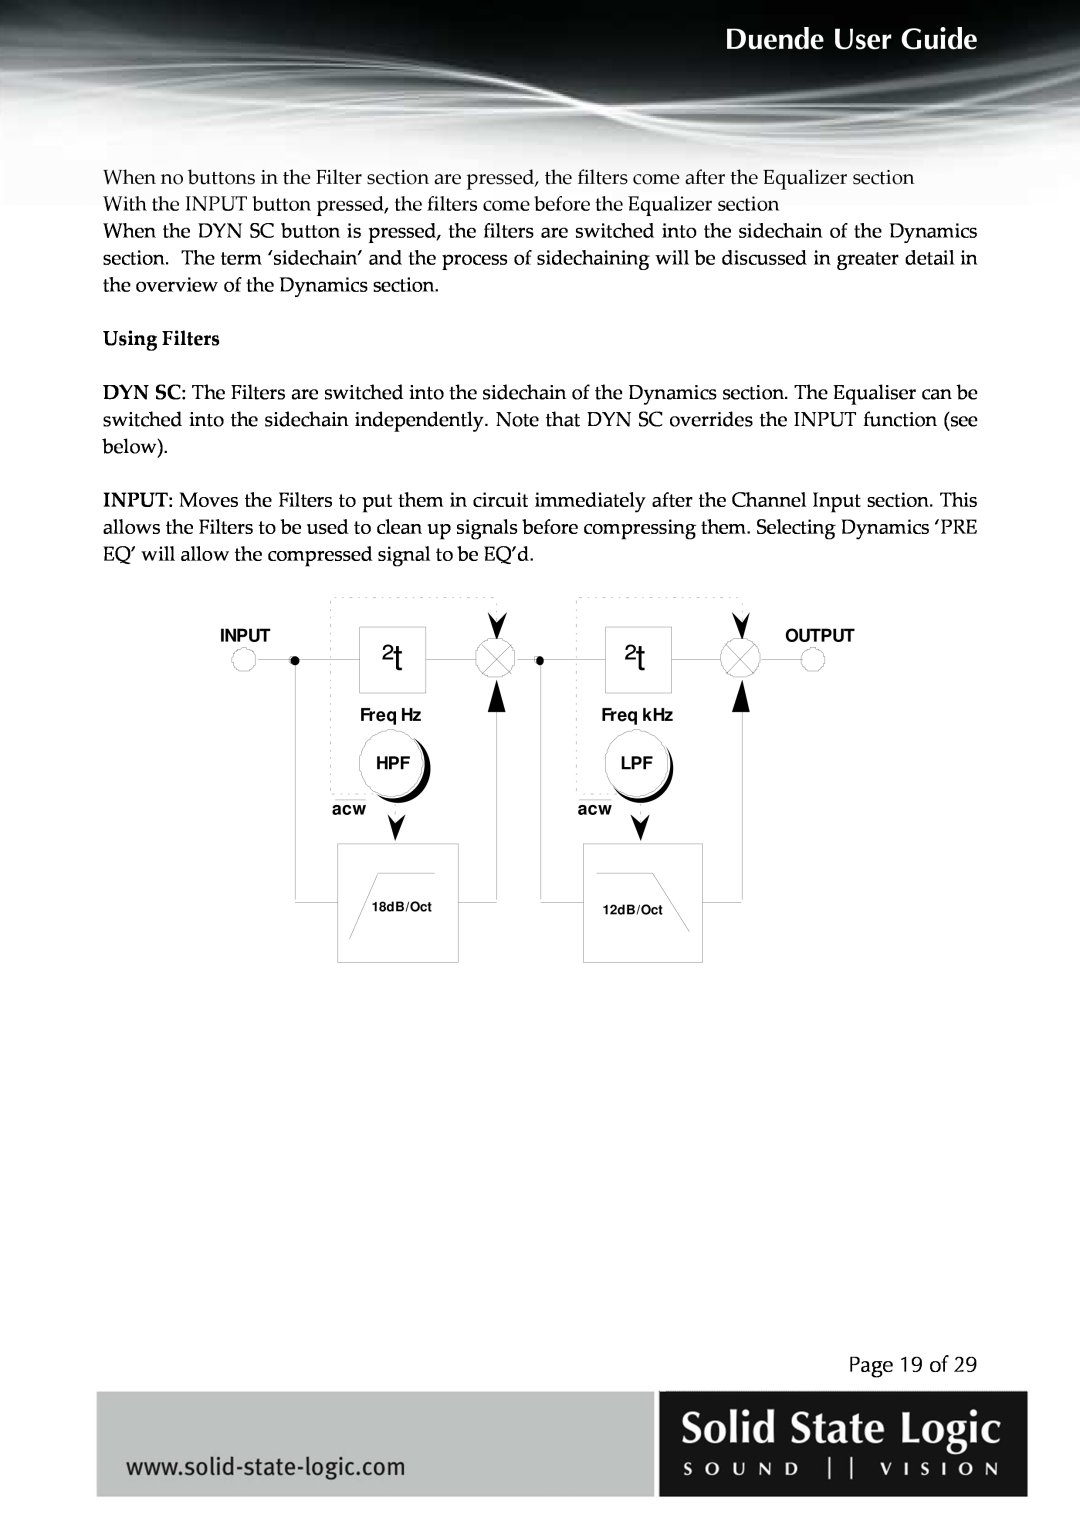 Solid State Logic DUENDE manual Page 19 of, Duende User Guide 